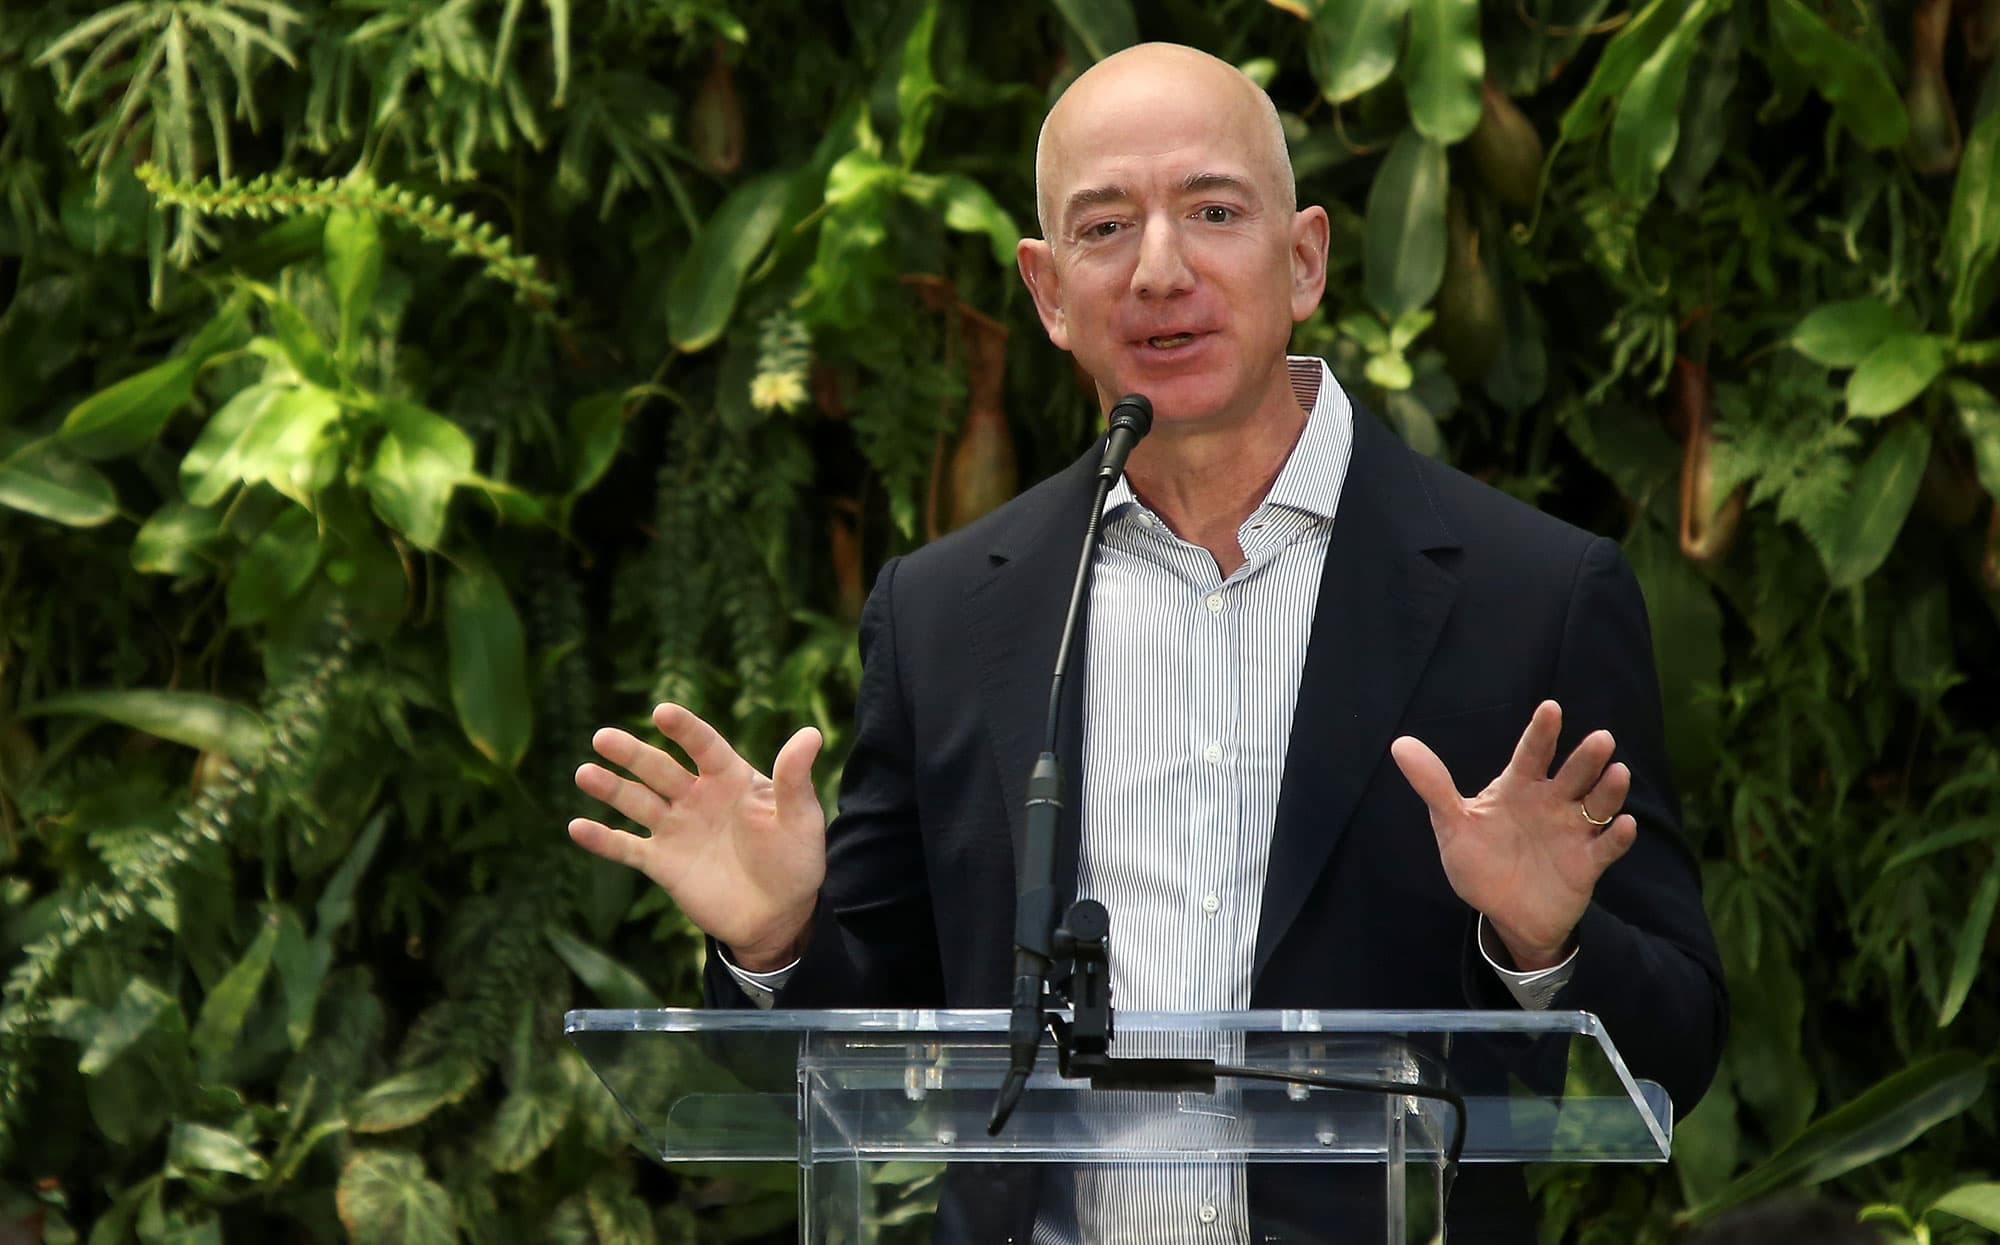 Amazon invests $10 million to help conserve forests as part of climate change plan - CNBC